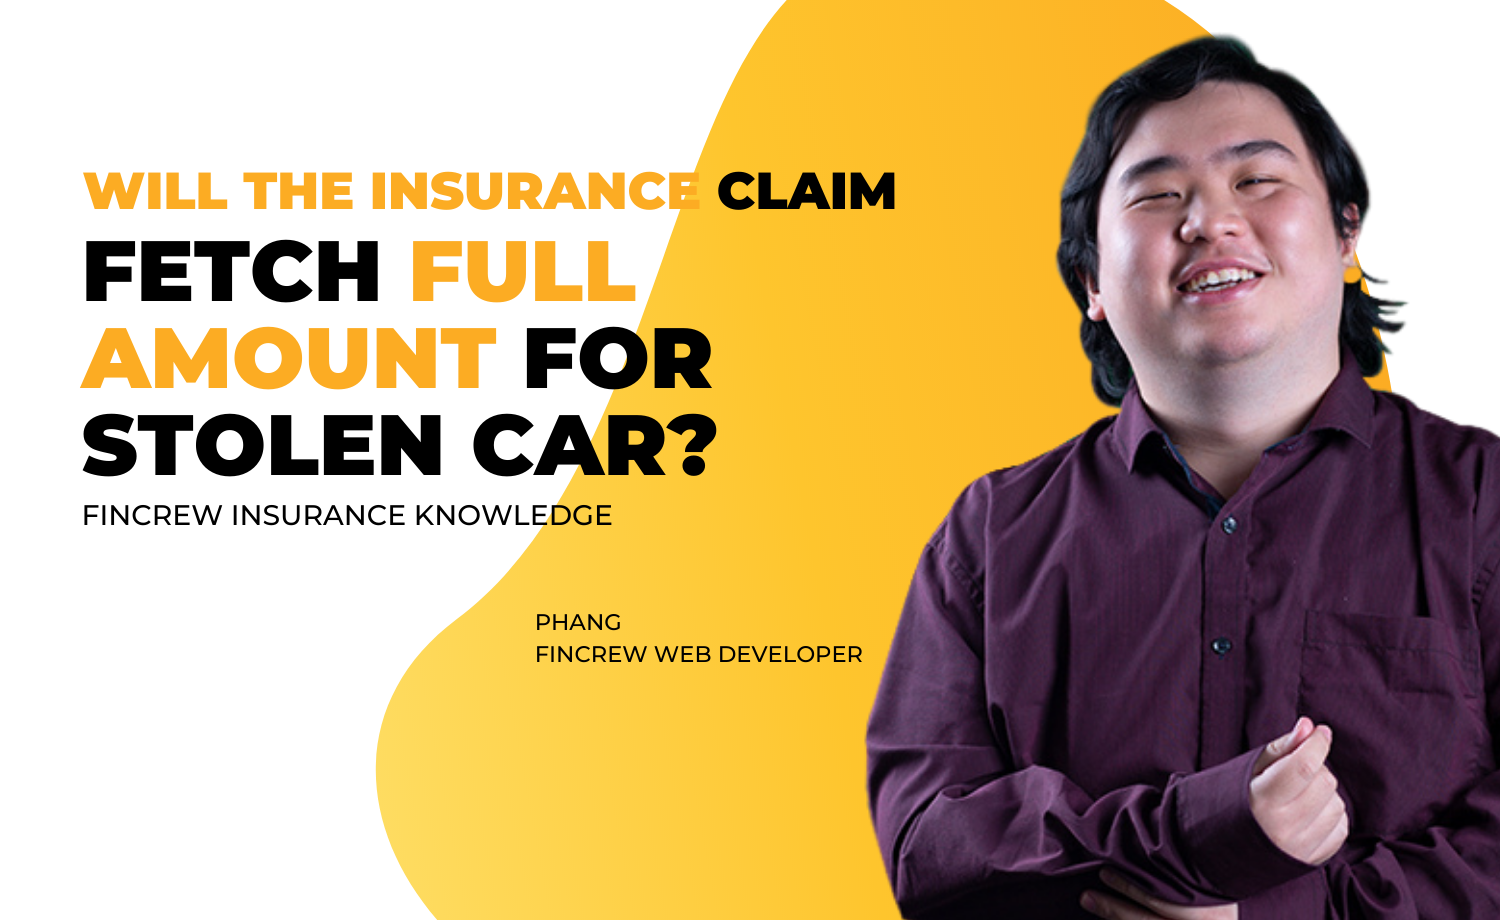 Will the insurance claim fetch full amount for stolen car blog featured image